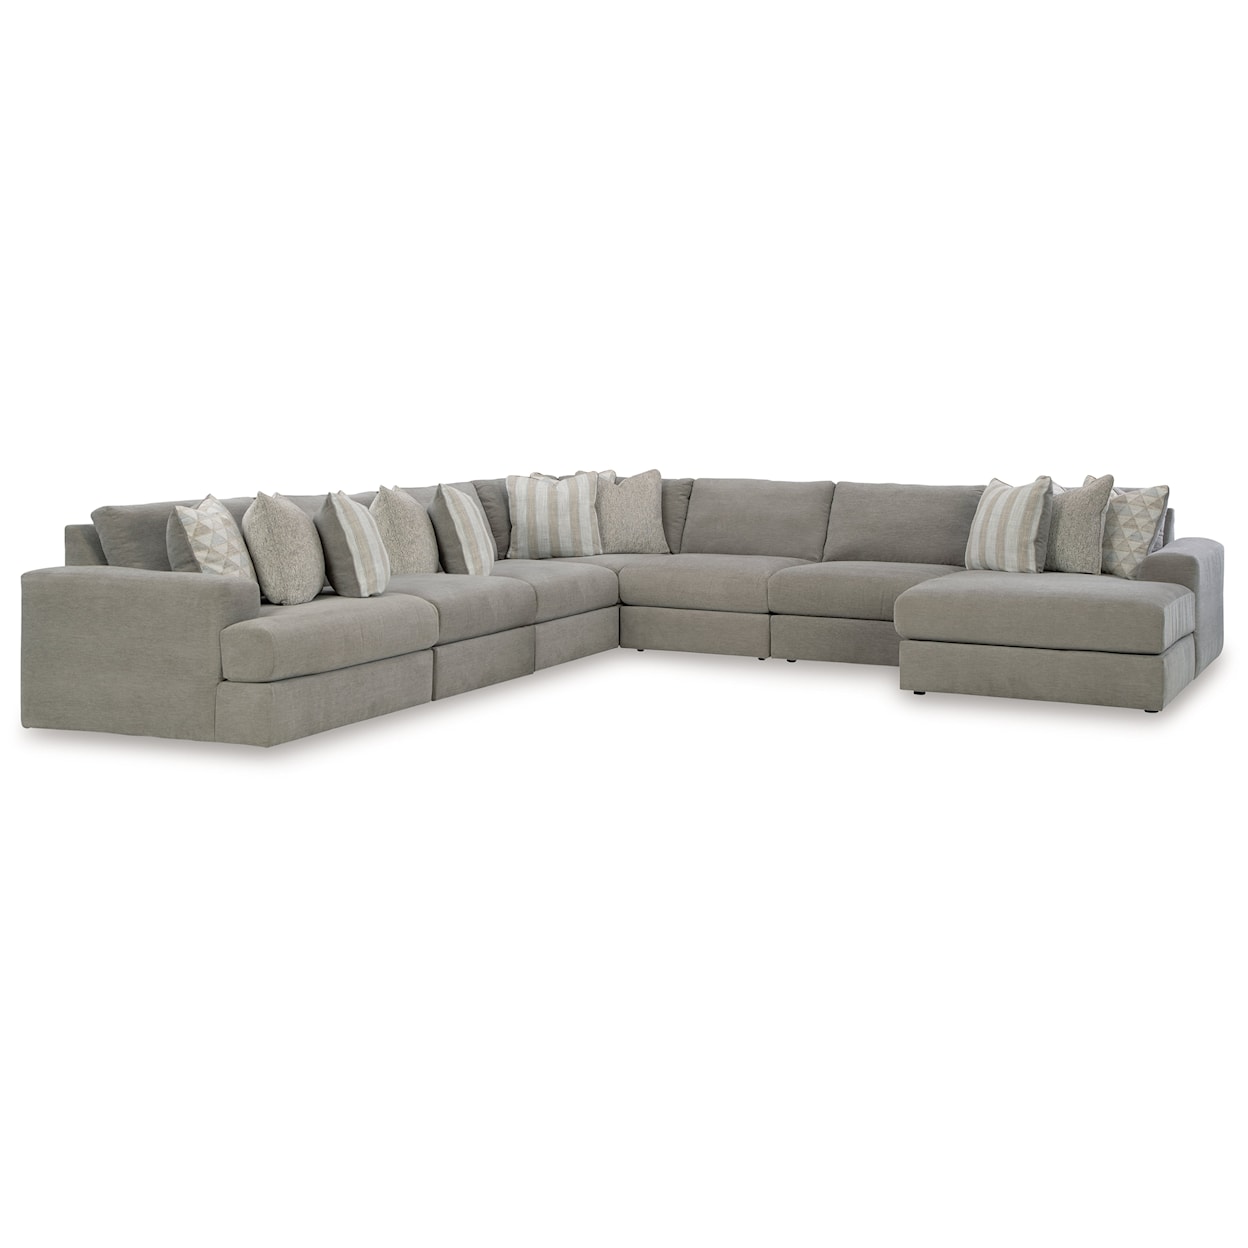 StyleLine Avaliyah 7-Piece Sectional With Chaise